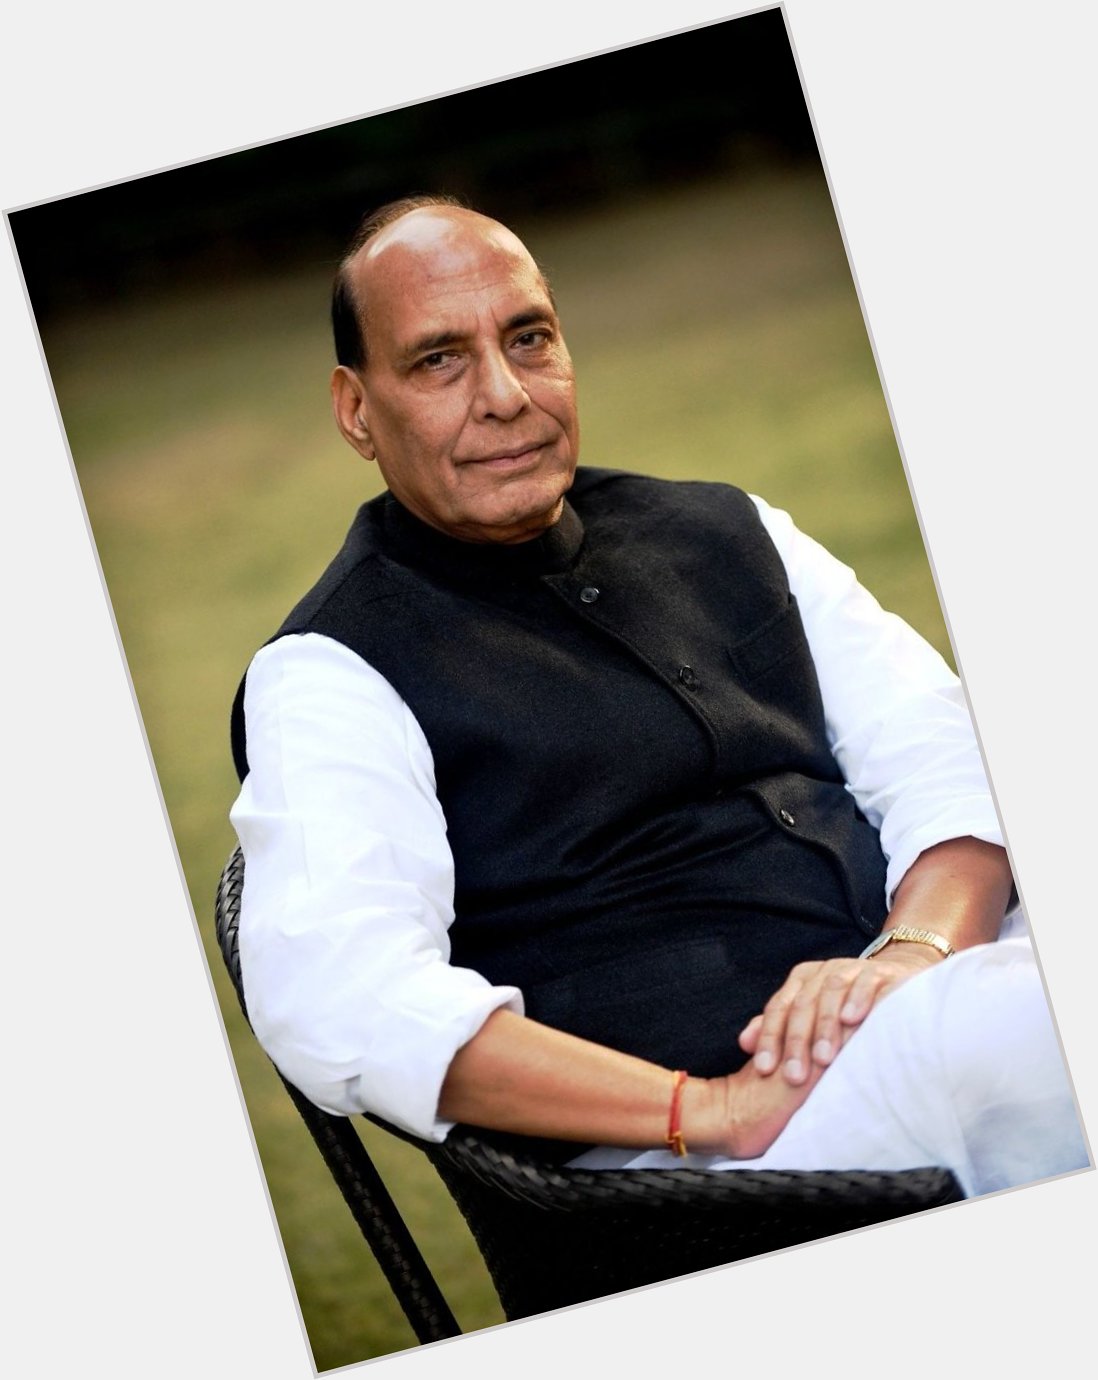 Wishing a very happy birthday to senior party leader and Hon\ble Defence Minister of India Shri Rajnath Singh ji. 